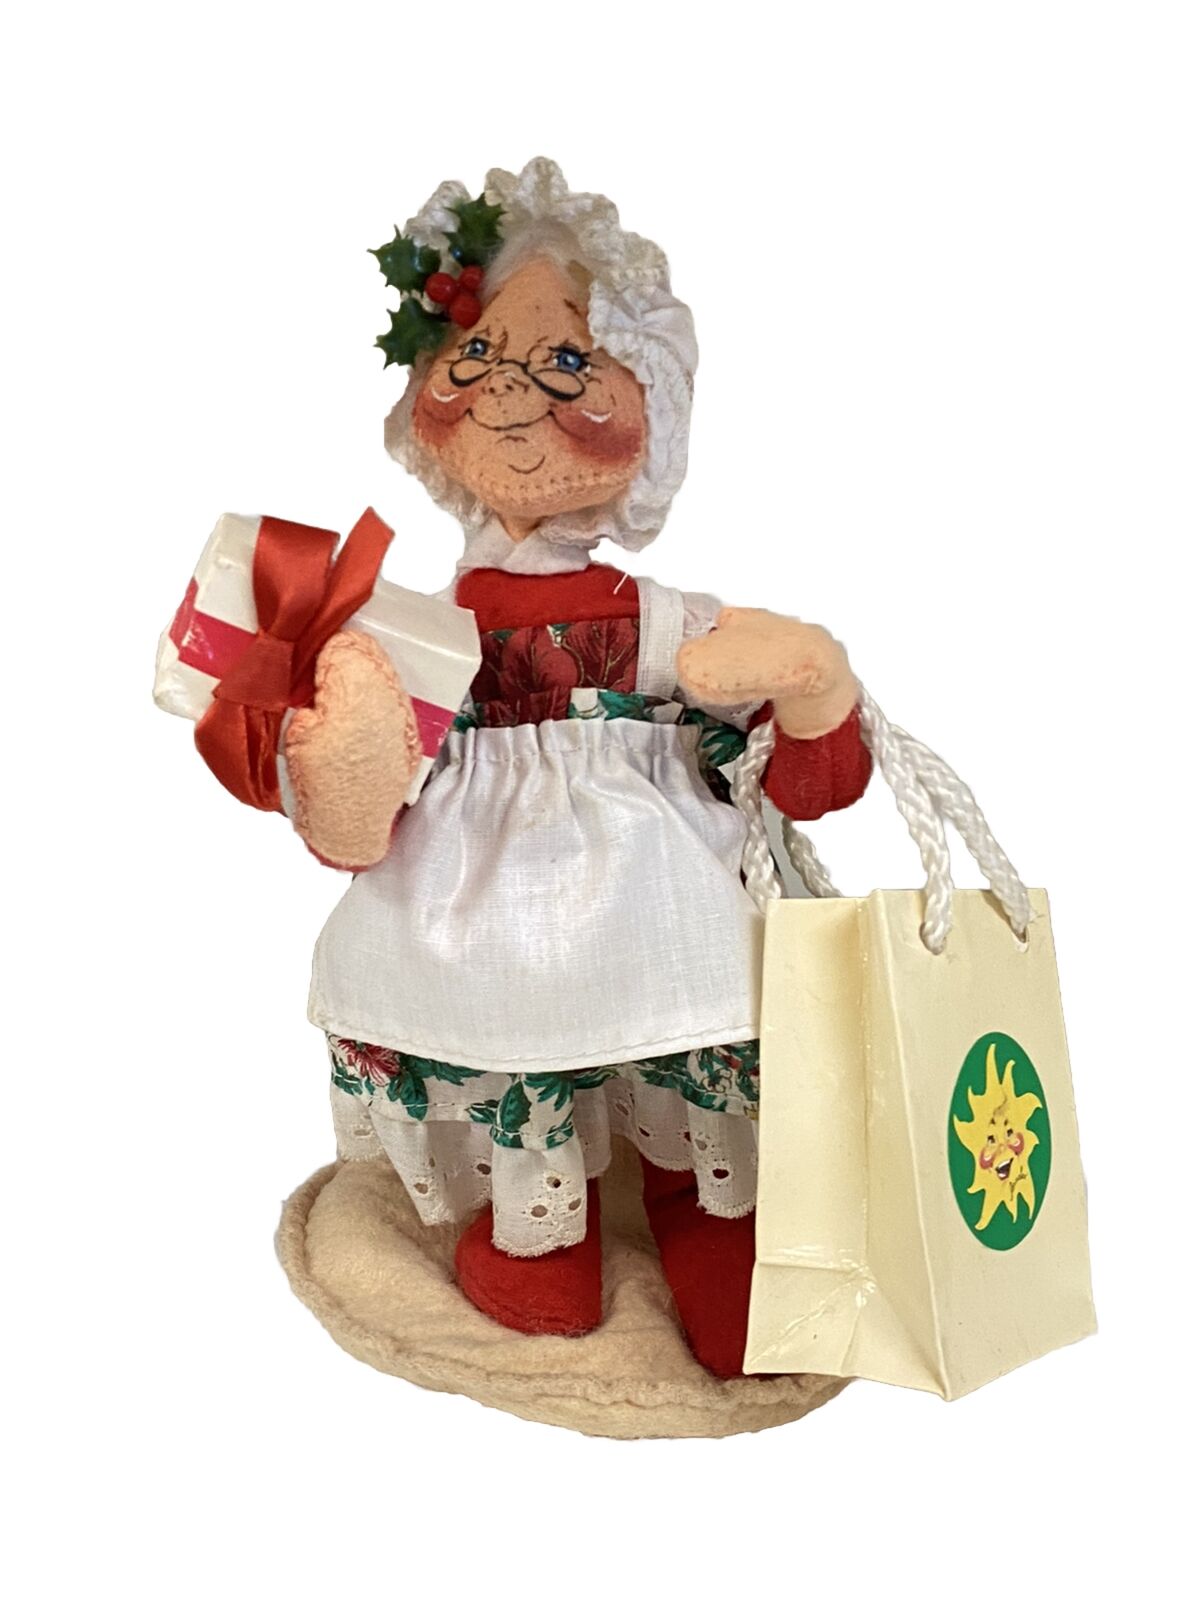 Vintage 1994 Annalee Miss Clause Christmas Shopping Doll Figurine